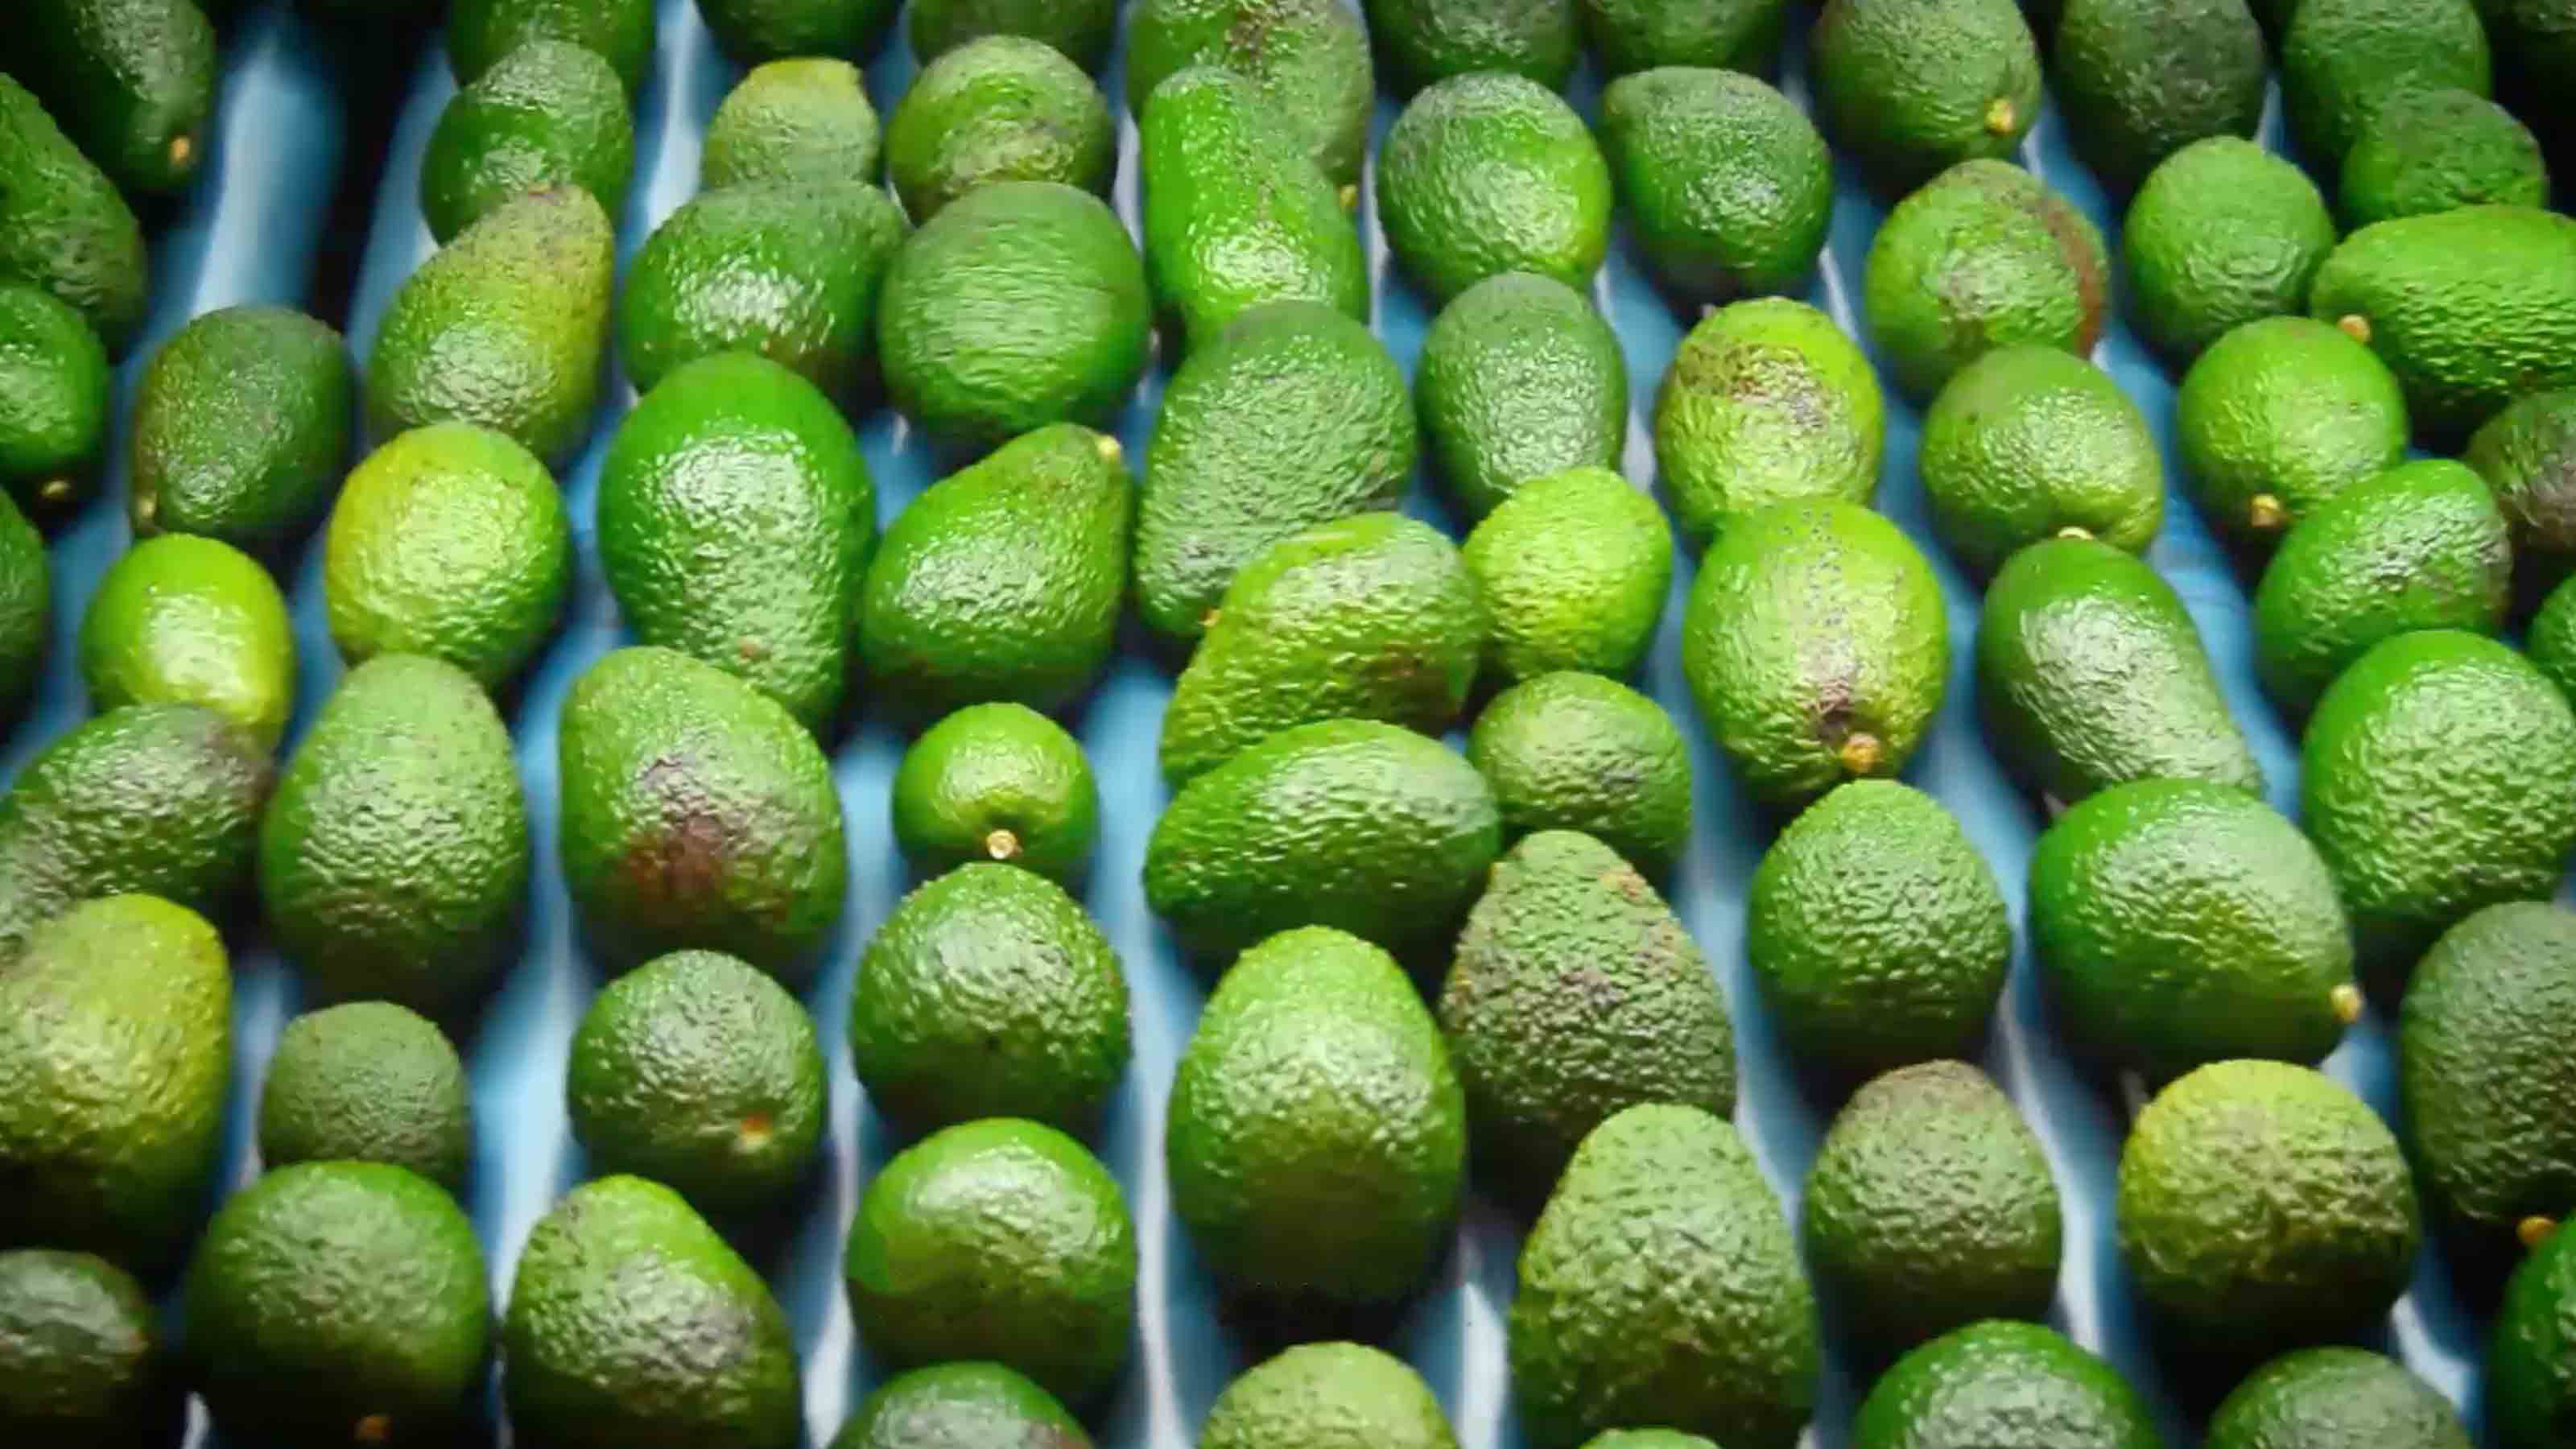 Pile of avocados